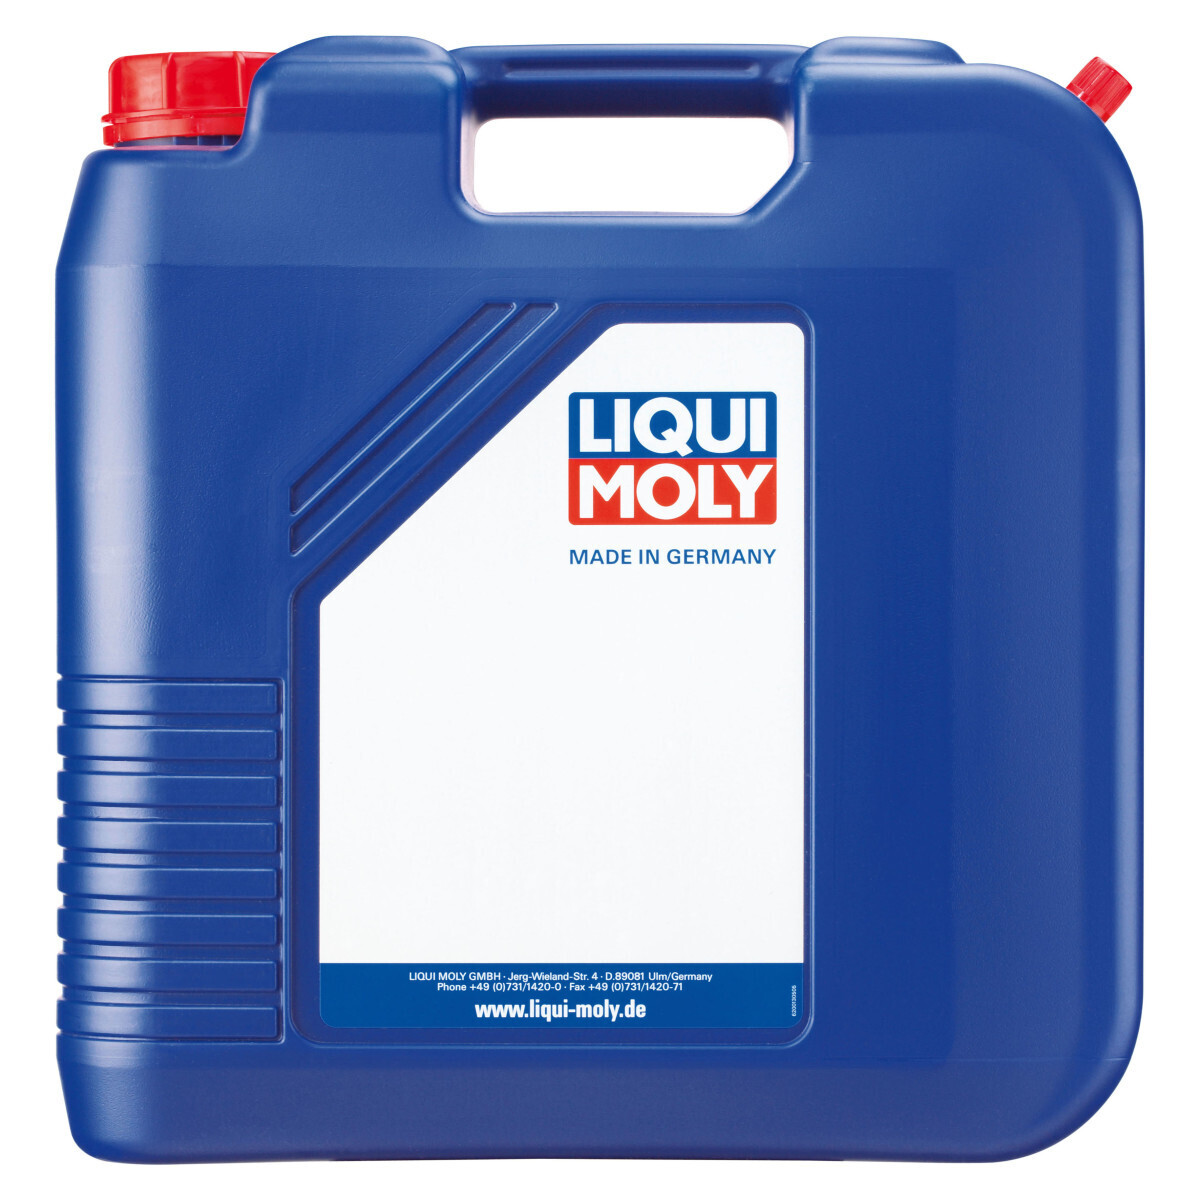 LIQUI MOLY
ENGINE OIL MOTORBIKE 2T FULLY SYNTHETIC 20 LITER